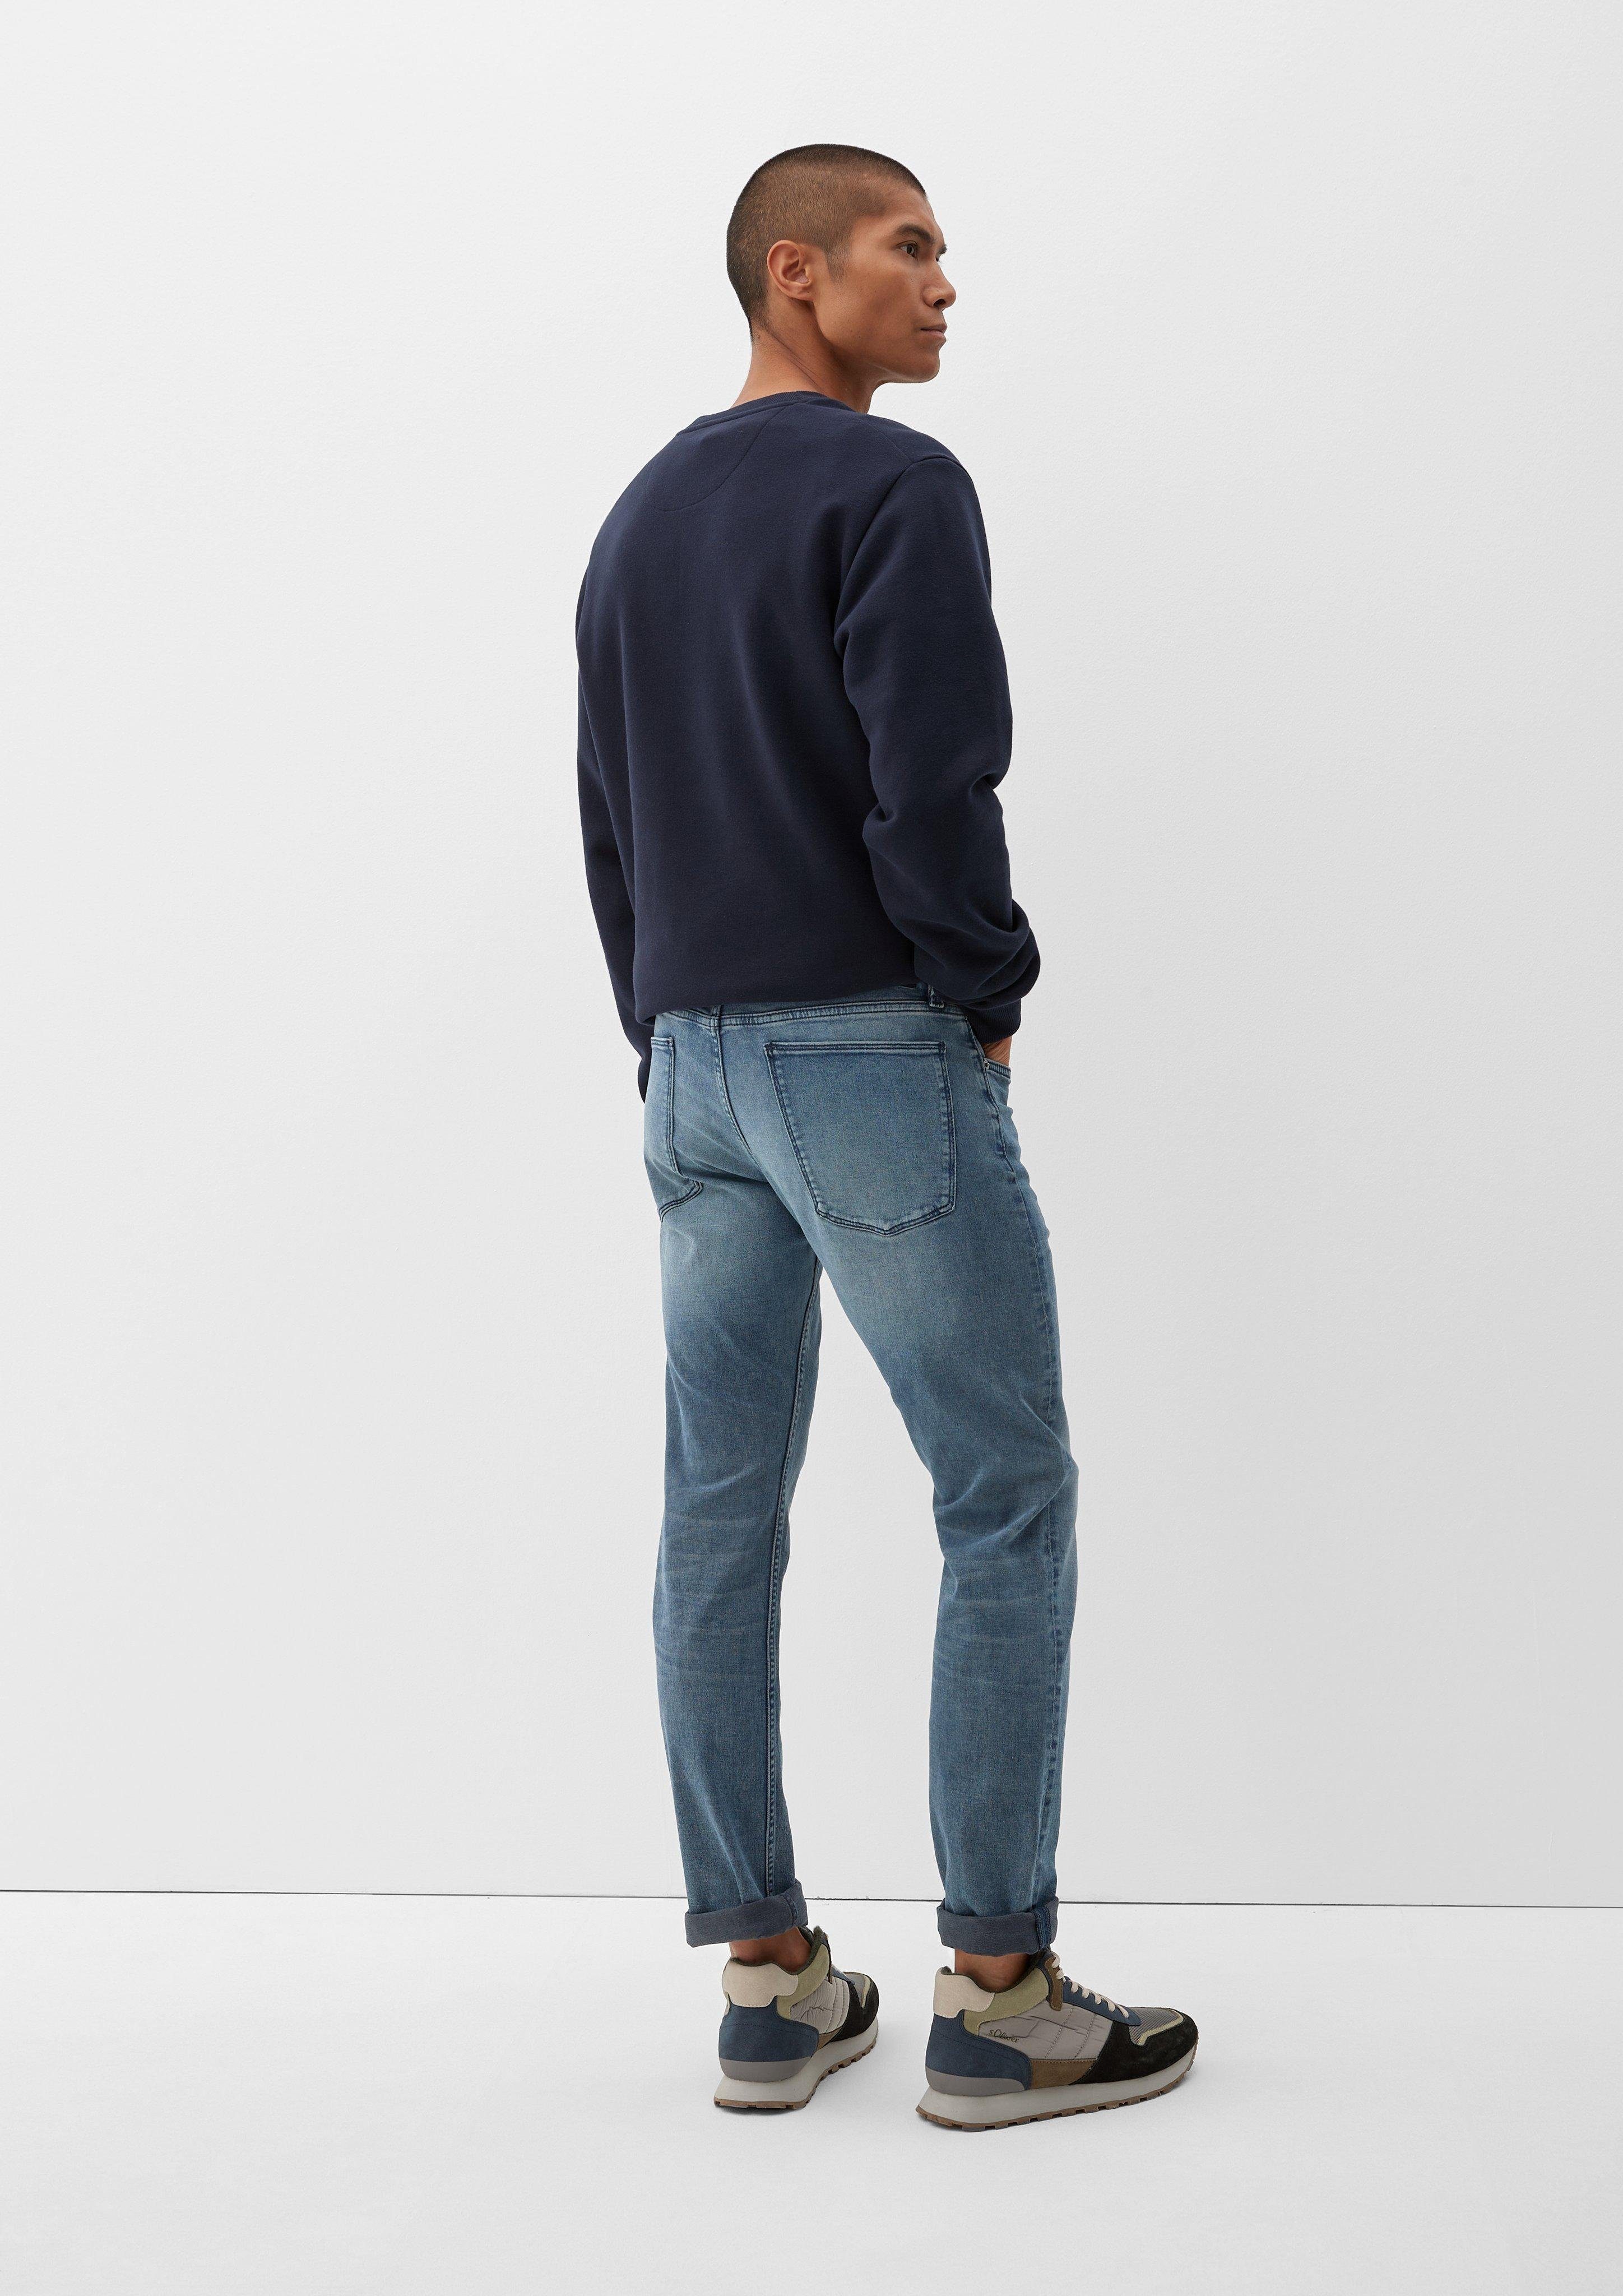 / Jeans Stoffhose Slim Waschung, Leder-Patch / Carson s.Oliver / Mid Leg Rise Tapered Fit